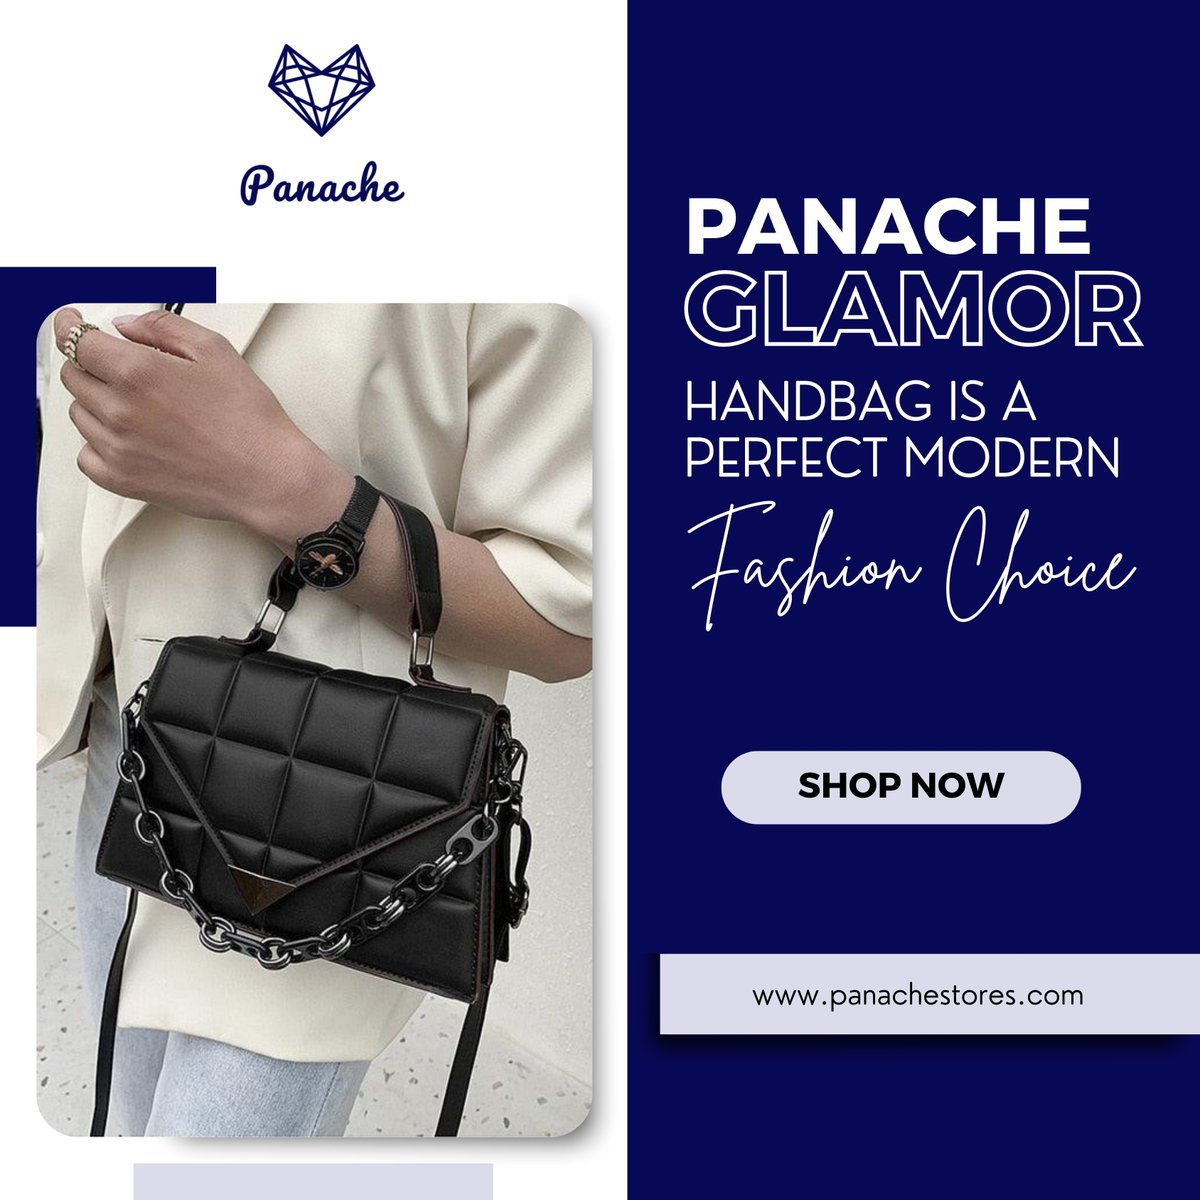 Crafted with high-quality materials and a stylish hue, this bag is sure to be an eye-catching accessory for any outfit. It offers both style and practicality. Its classic elements make it a reliable and chic companion for everyday use.

#stylishbag
#everydaychic
#accessorygoals